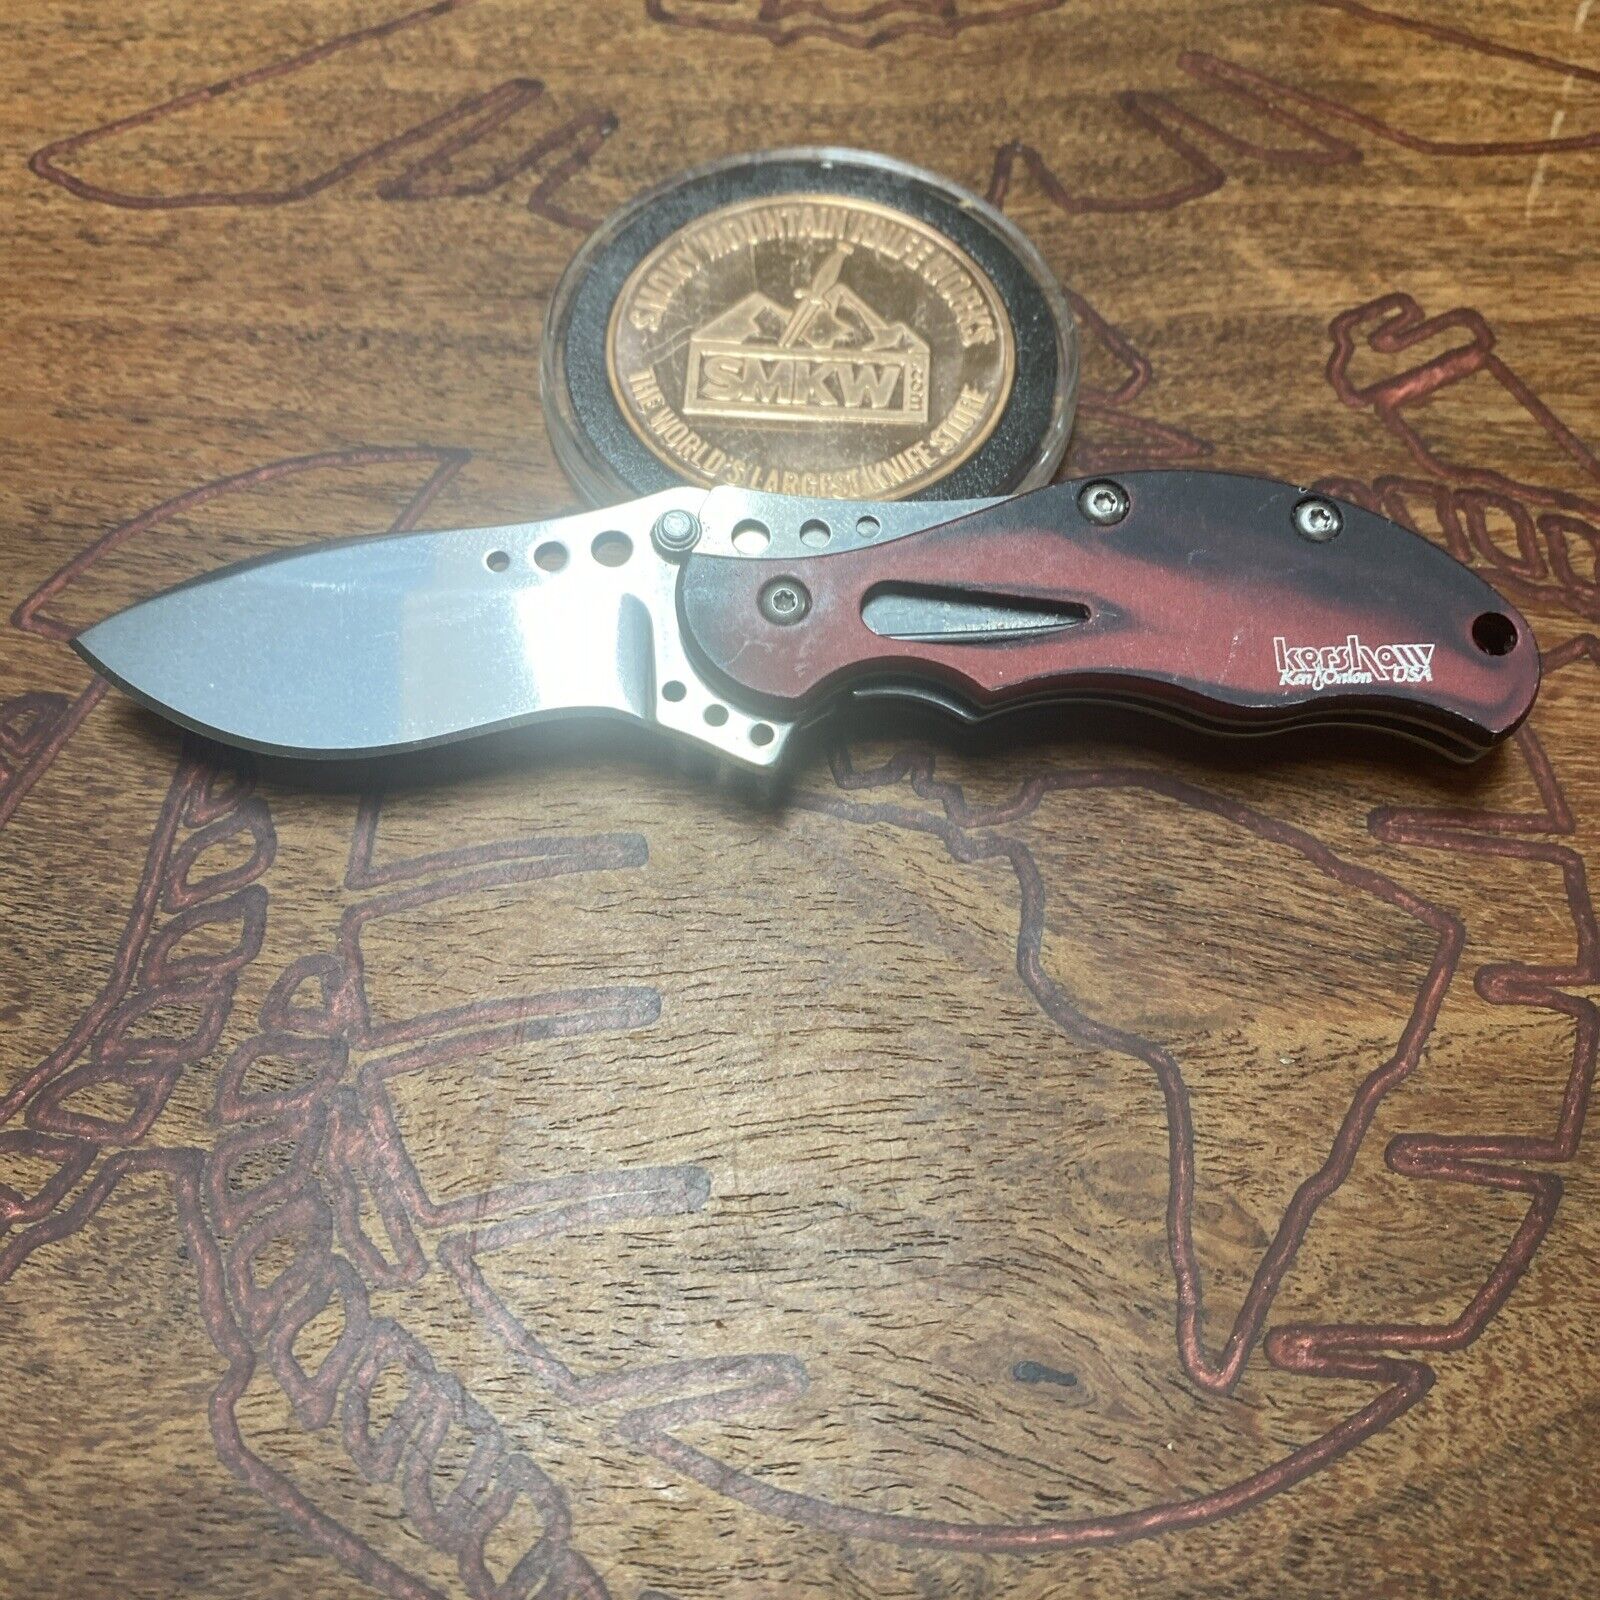 RARE/DISCONTINUED Kershaw 1585BR Baby Boa Folding Knife - Made In The USA